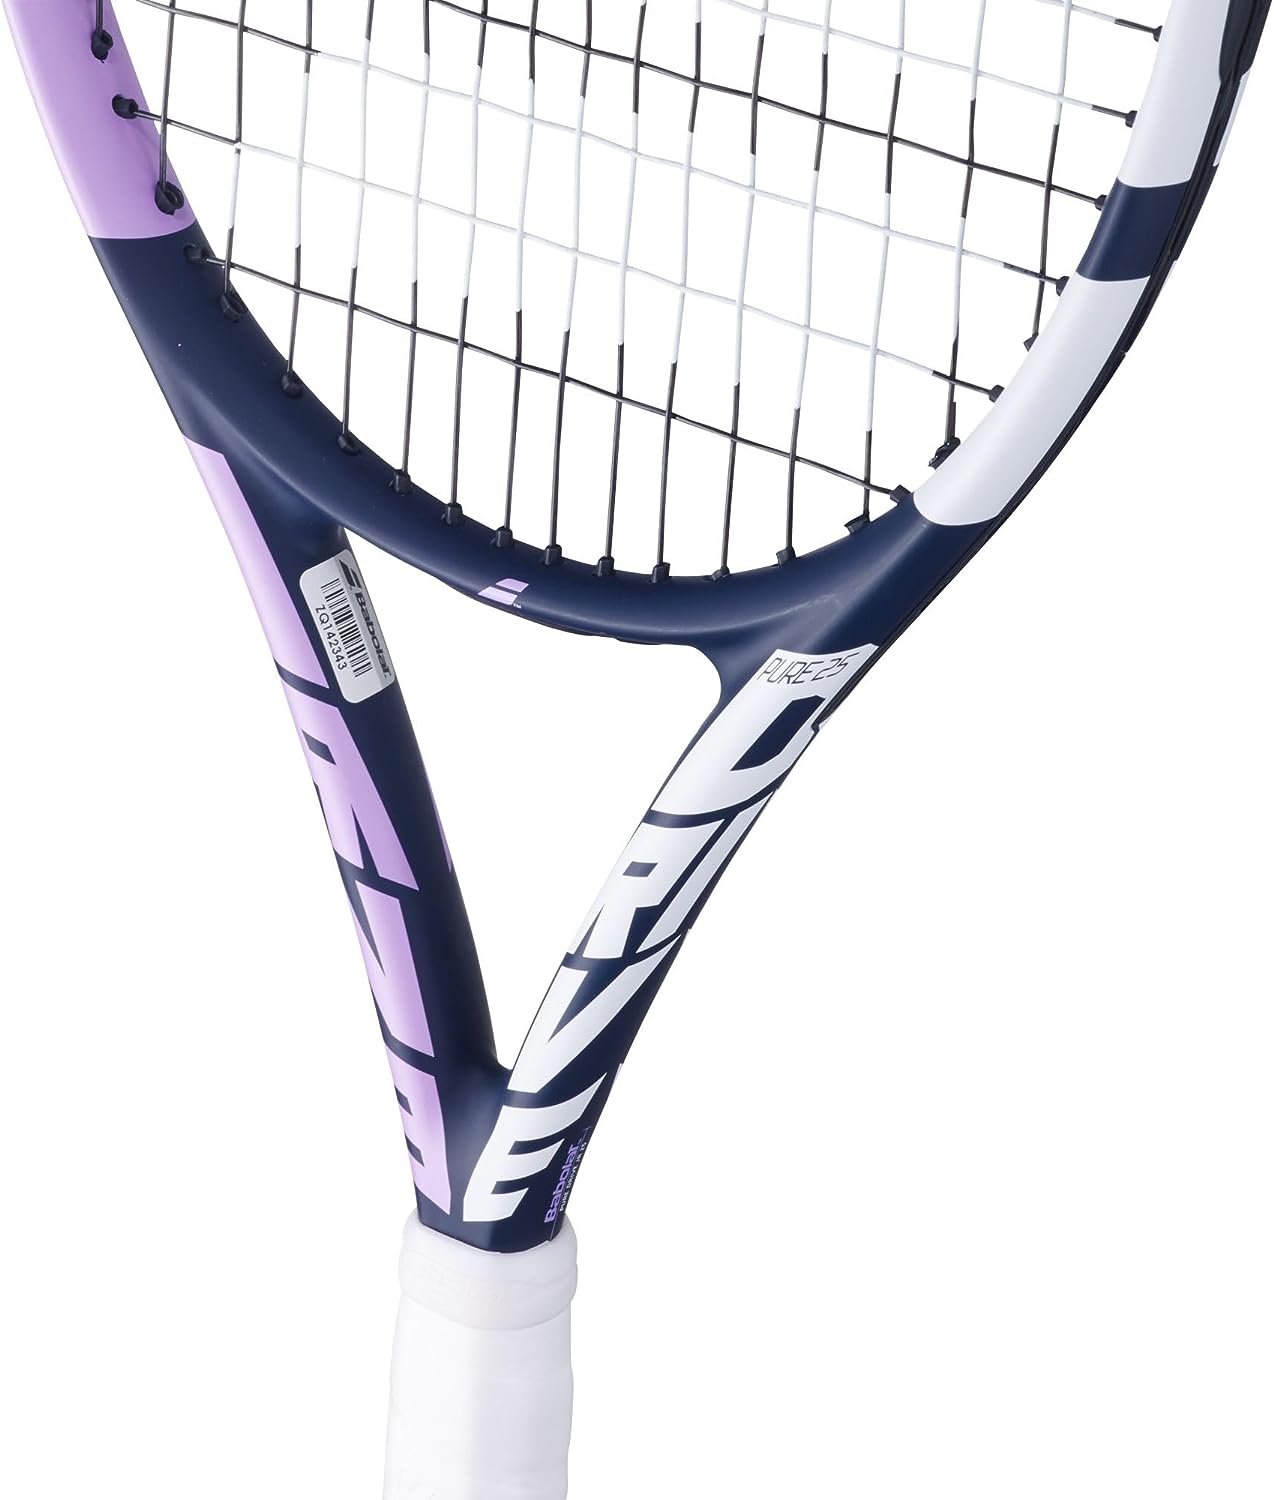 Babolat Pure Drive Junior Tennis Racquet Bundled with a Child's Tennis Backpack and 3 Tennis Training Balls